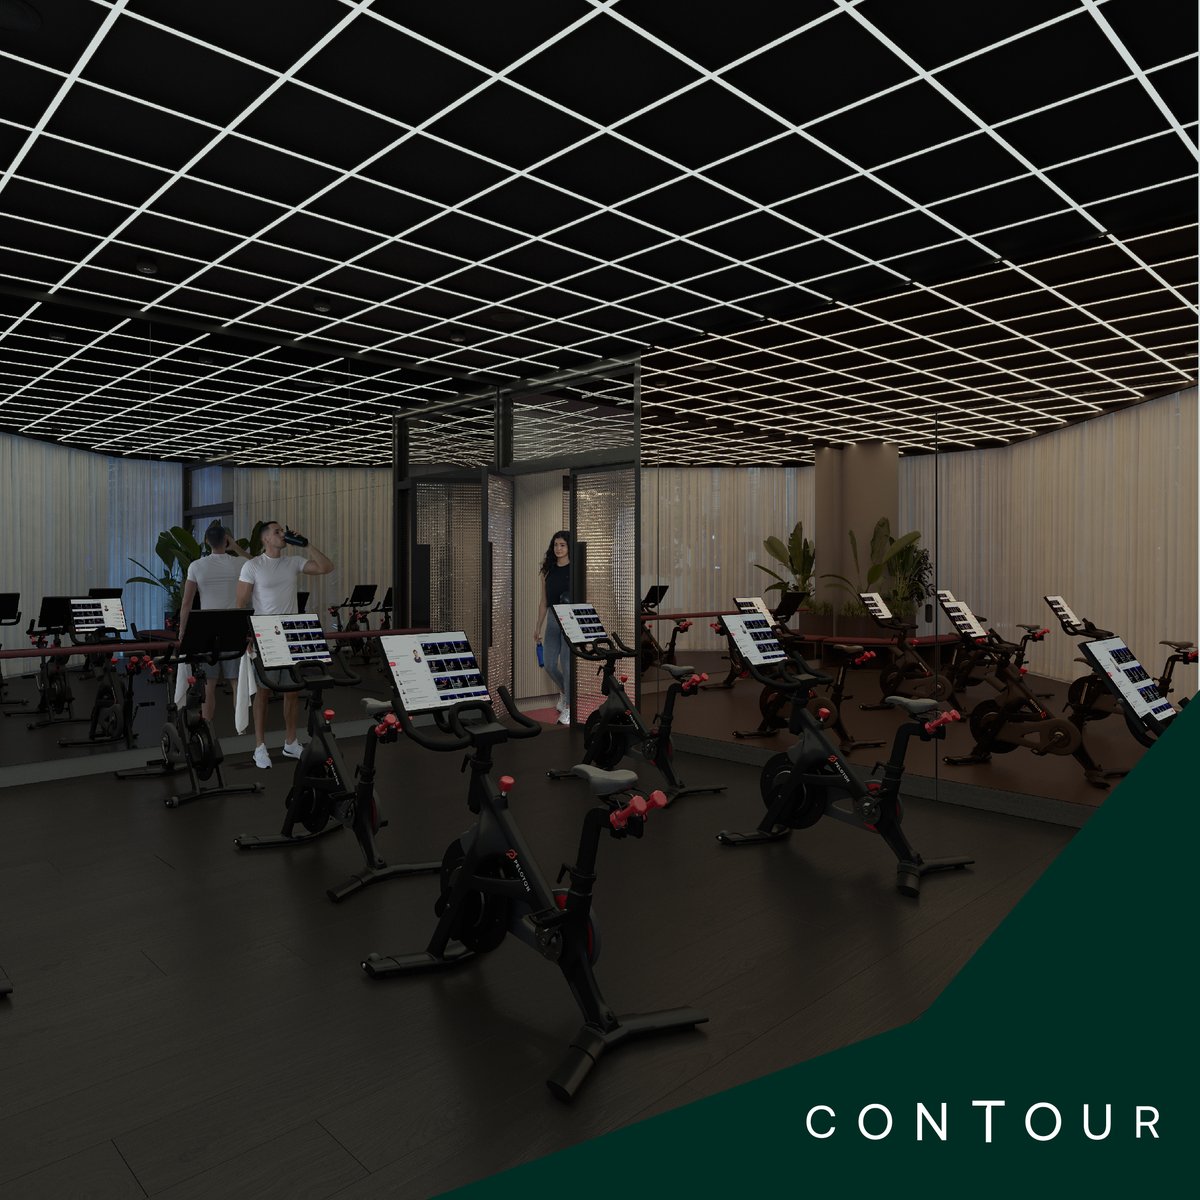 We know that health is essential for happiness. Our Contour residents will be able to let off steam whenever they want to at The Club and Peloton Spin Studio. contournewjackson.com Contour, Part of @NewJacksonMCR, planned for completion in Q1/Q2 2027. #Contour #NewJackson